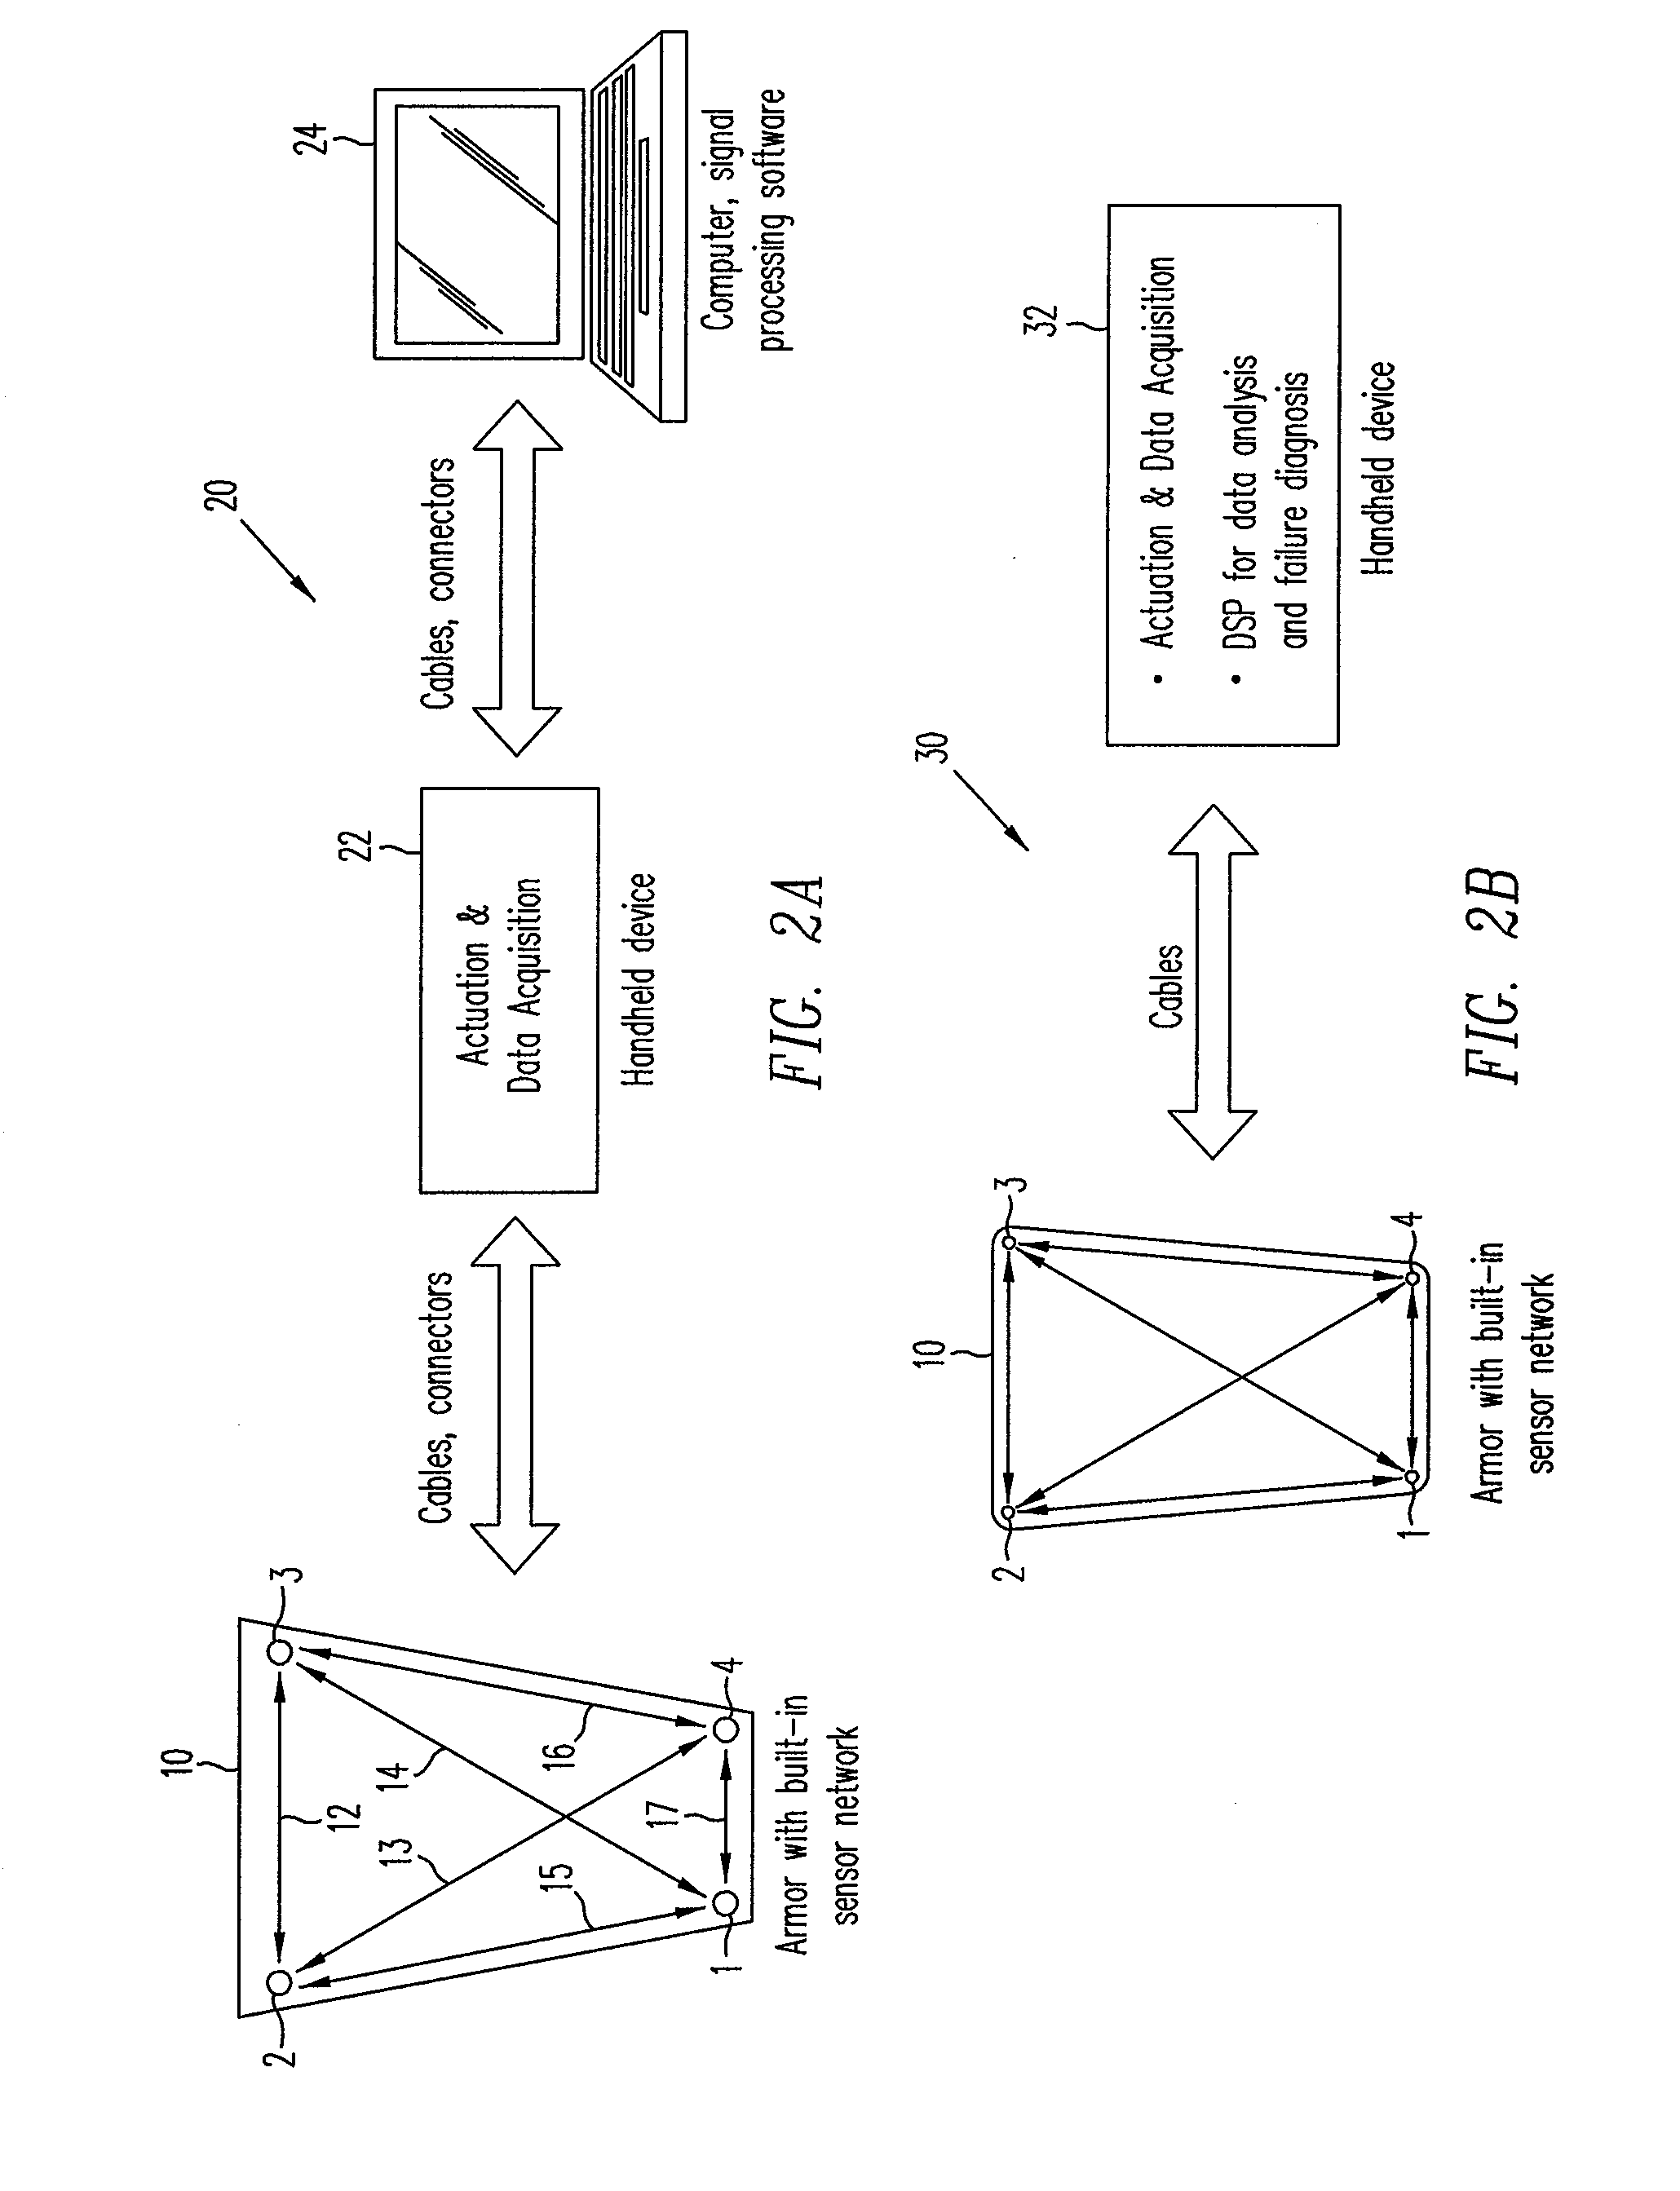 Method and apparatus for detecting damage in armor structures